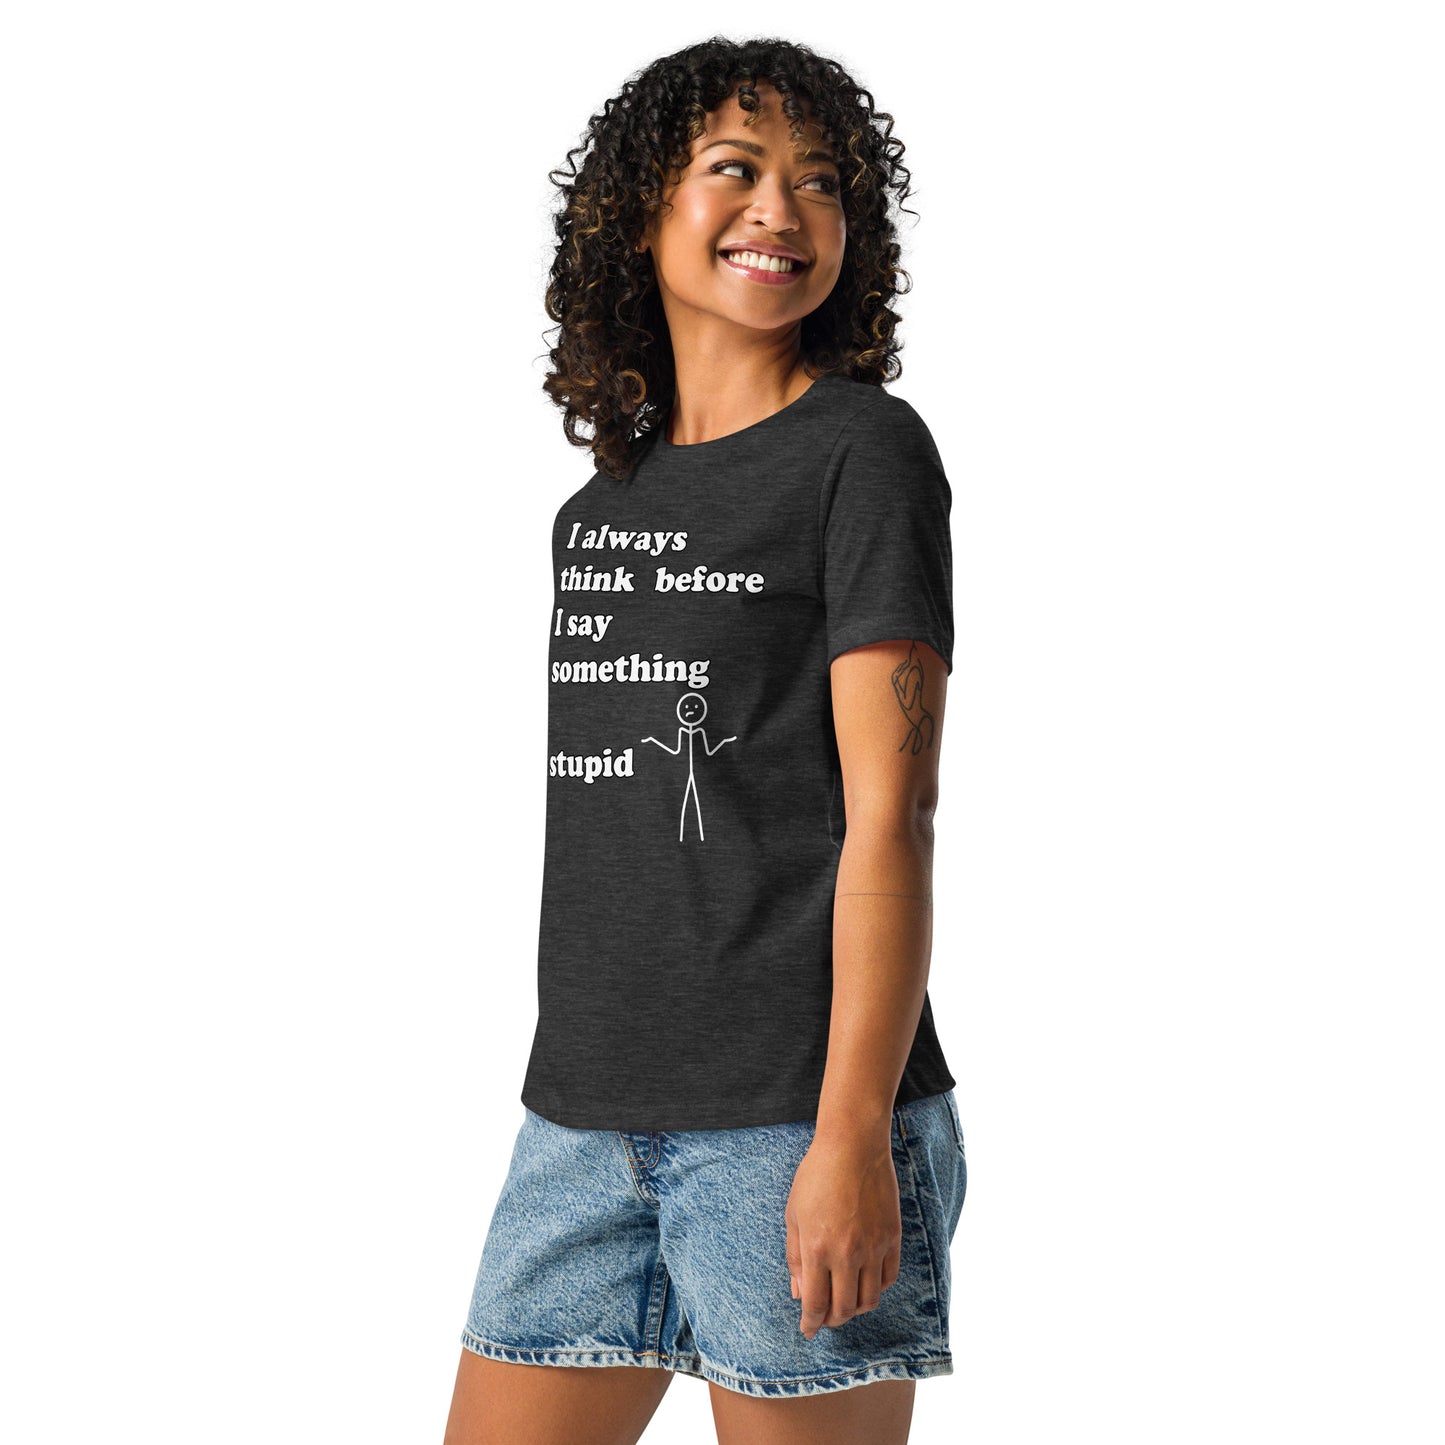 Woman with dark grey t-shirt with text "I always think before I say something stupid"